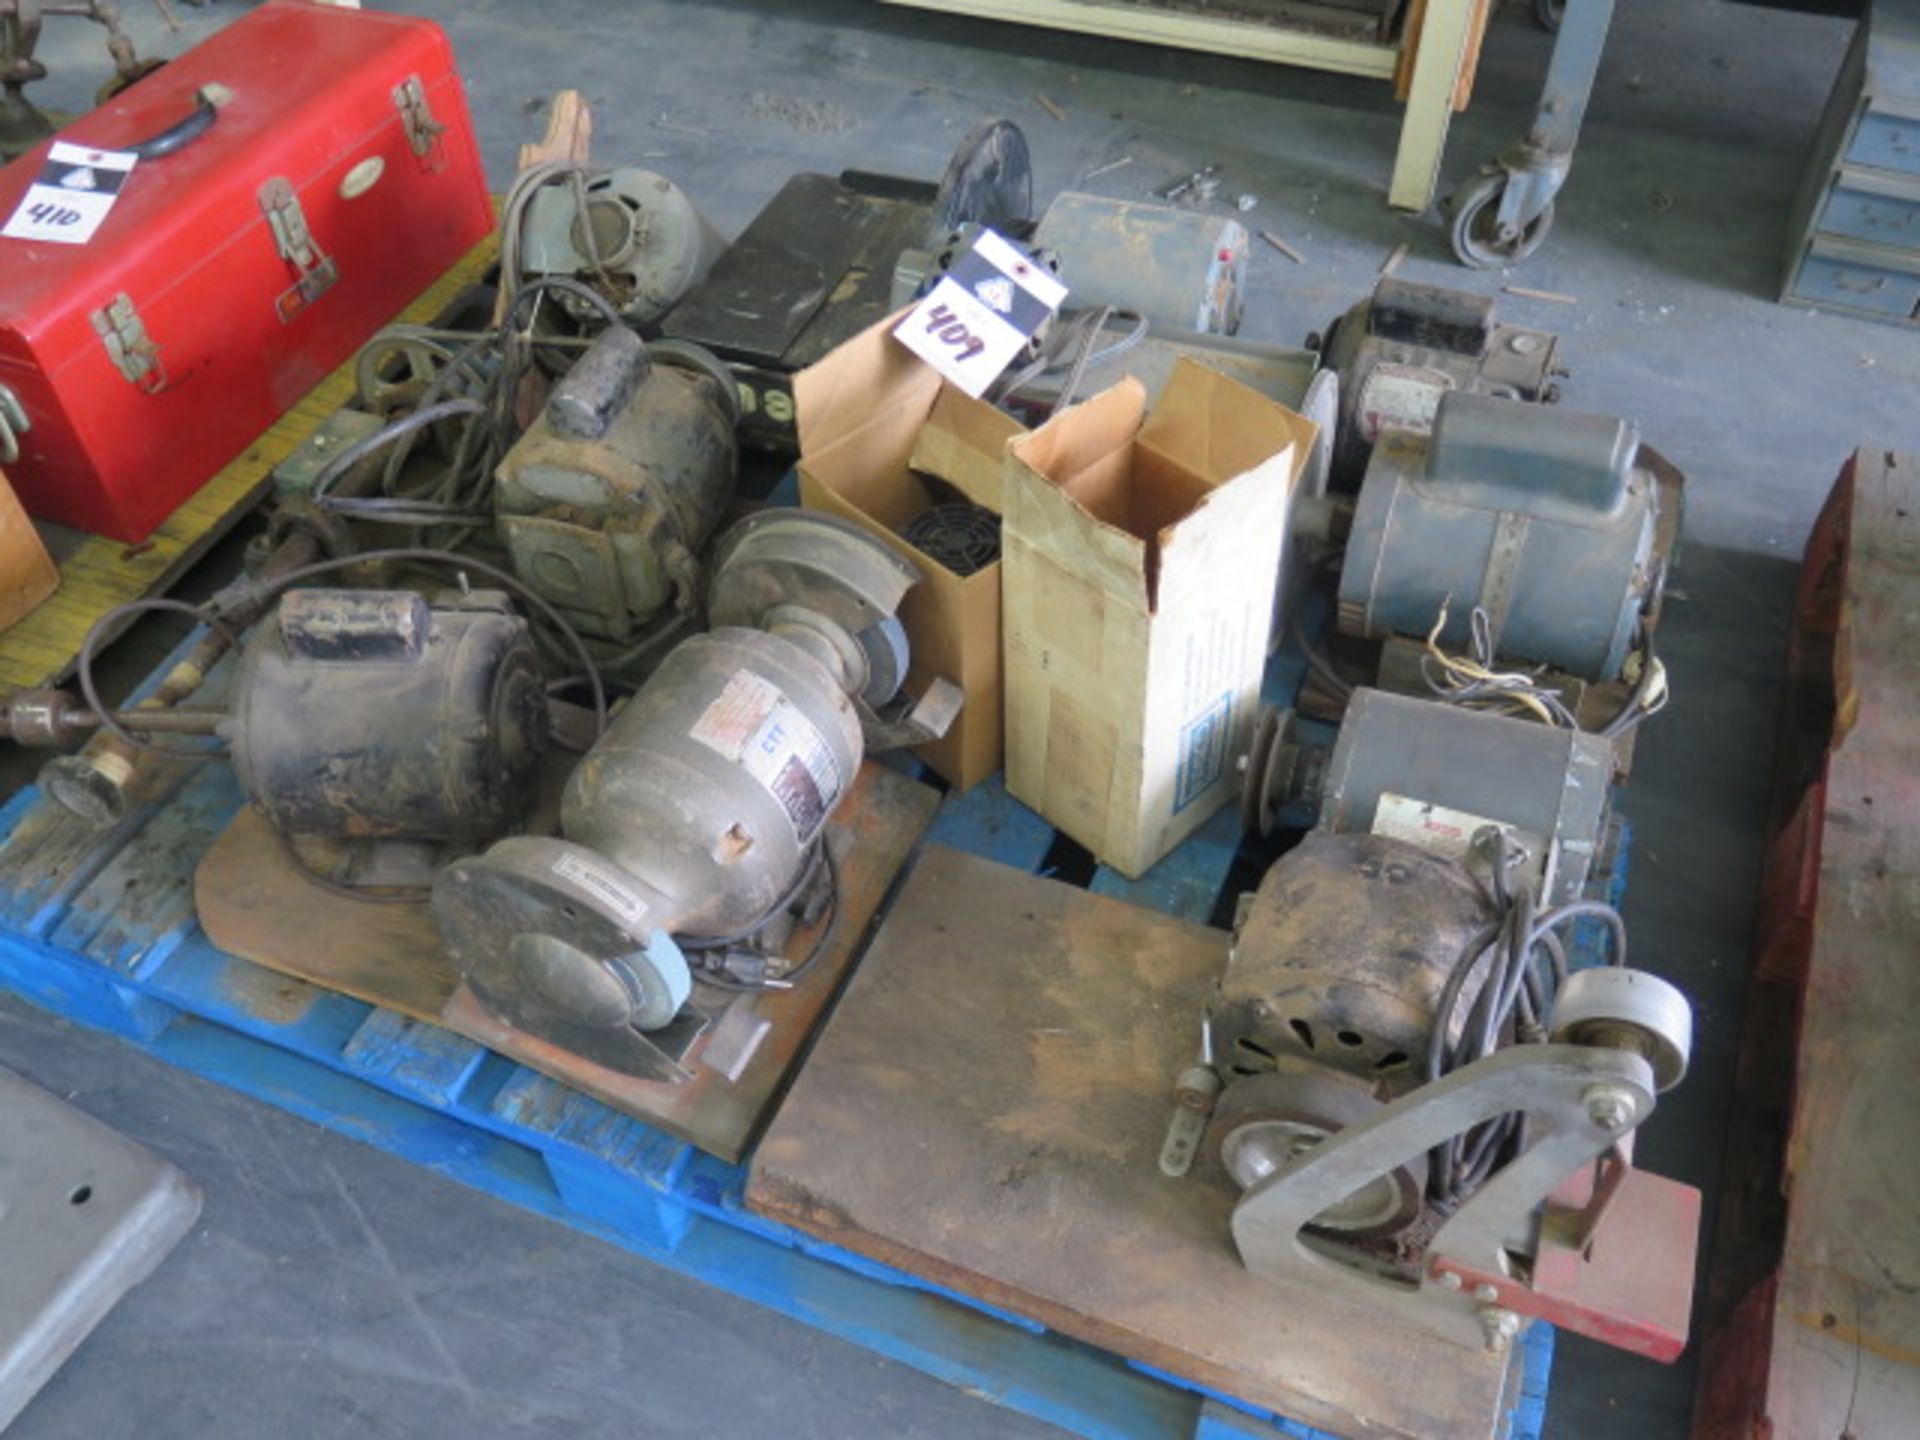 Disc Sanders, Belt Sander, Bench Grinders and Misc (1-Pallet), SOLD AS IS WITH NO WARRANTY